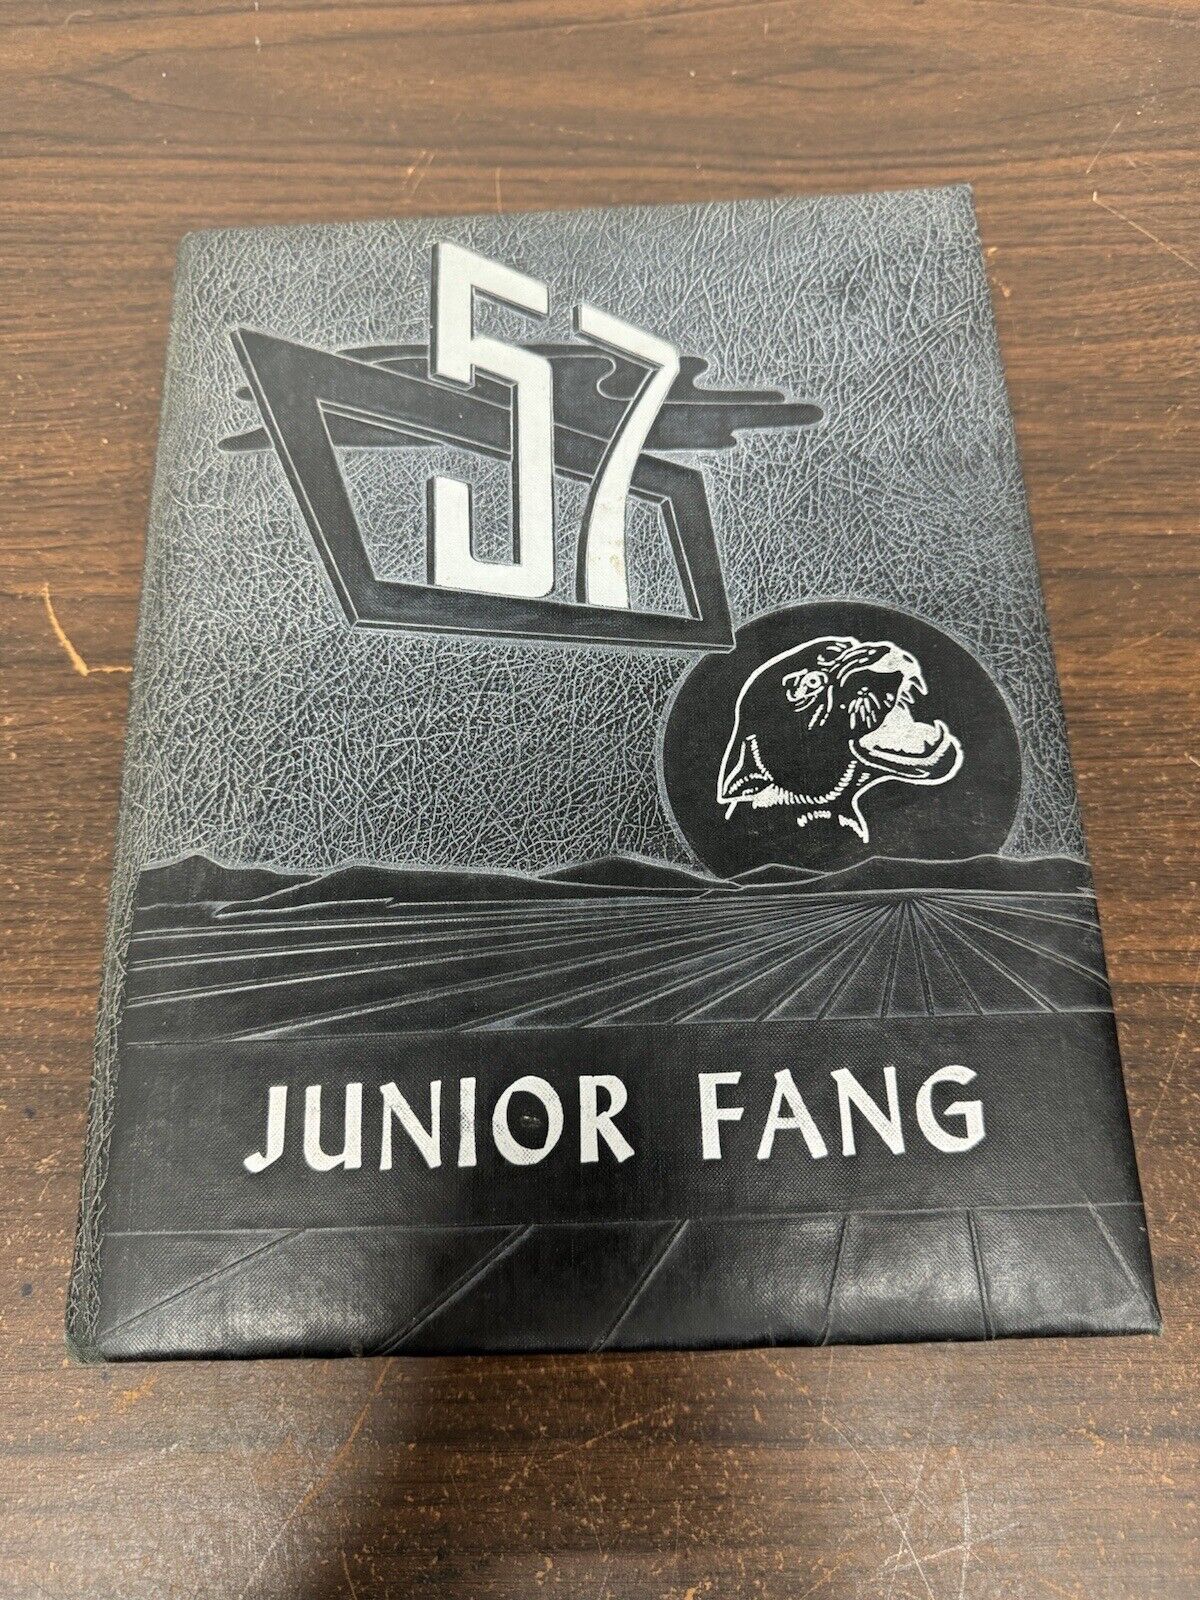 1957 Lufkin high school yearbook the fang